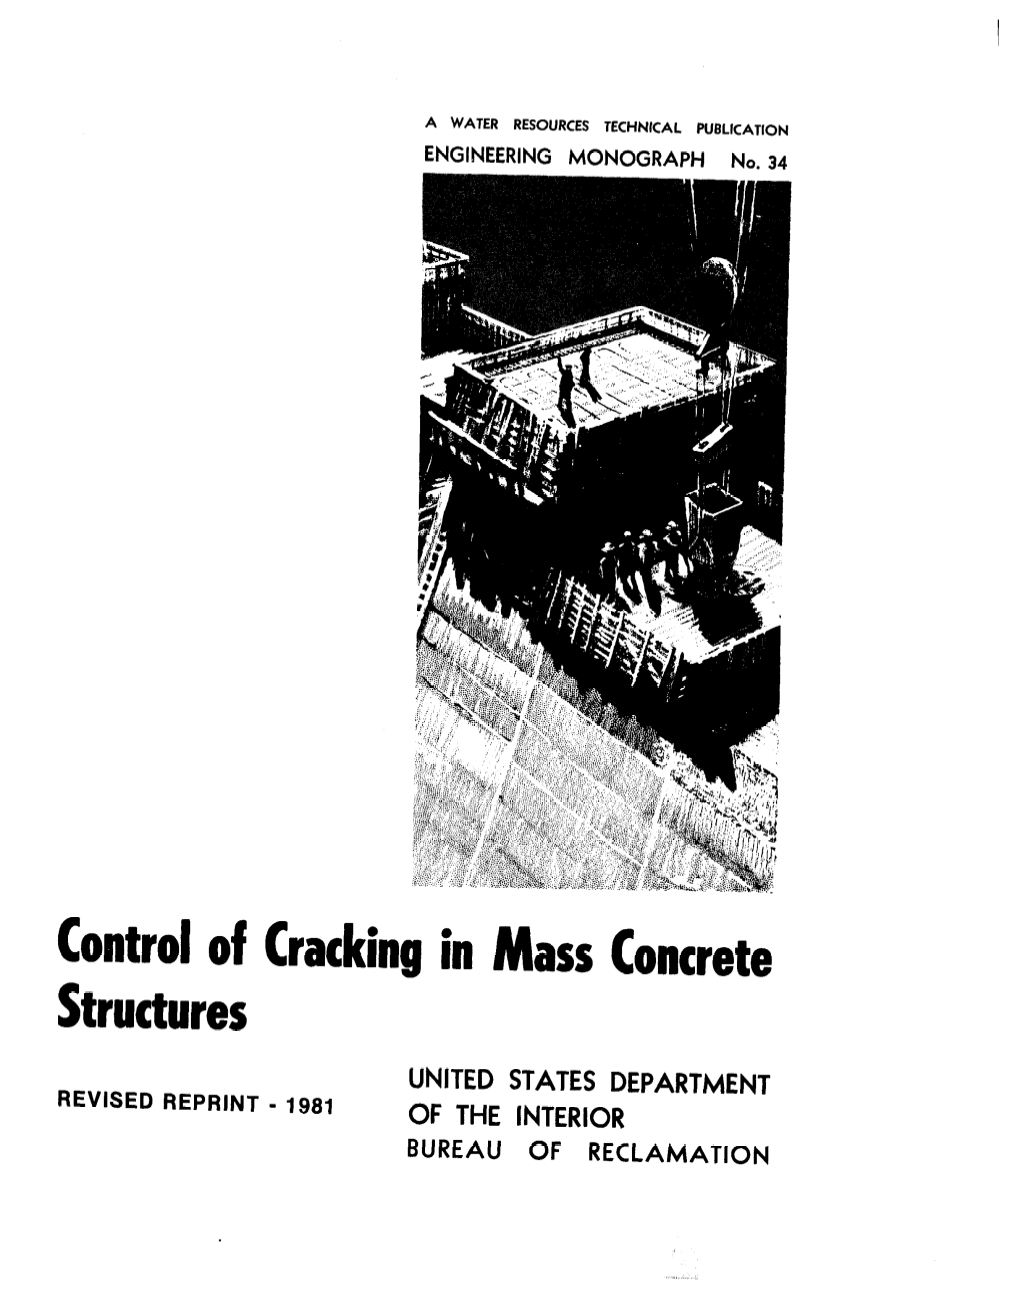 Control of Cracking in Mass Concrete Structures